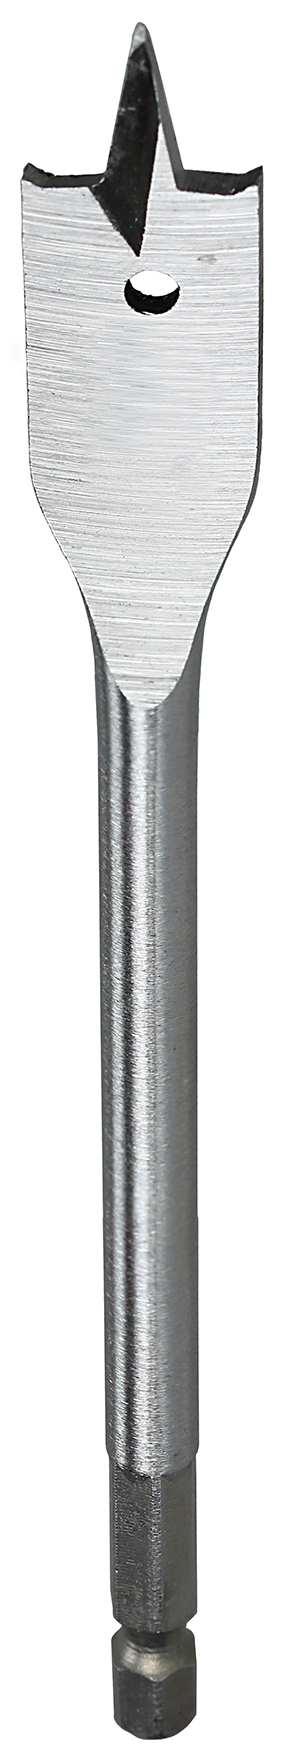 Spade Drill Bit, 1 in. Size, Hex shank type, Cold Forged Steel material, 6 in. drilling depth